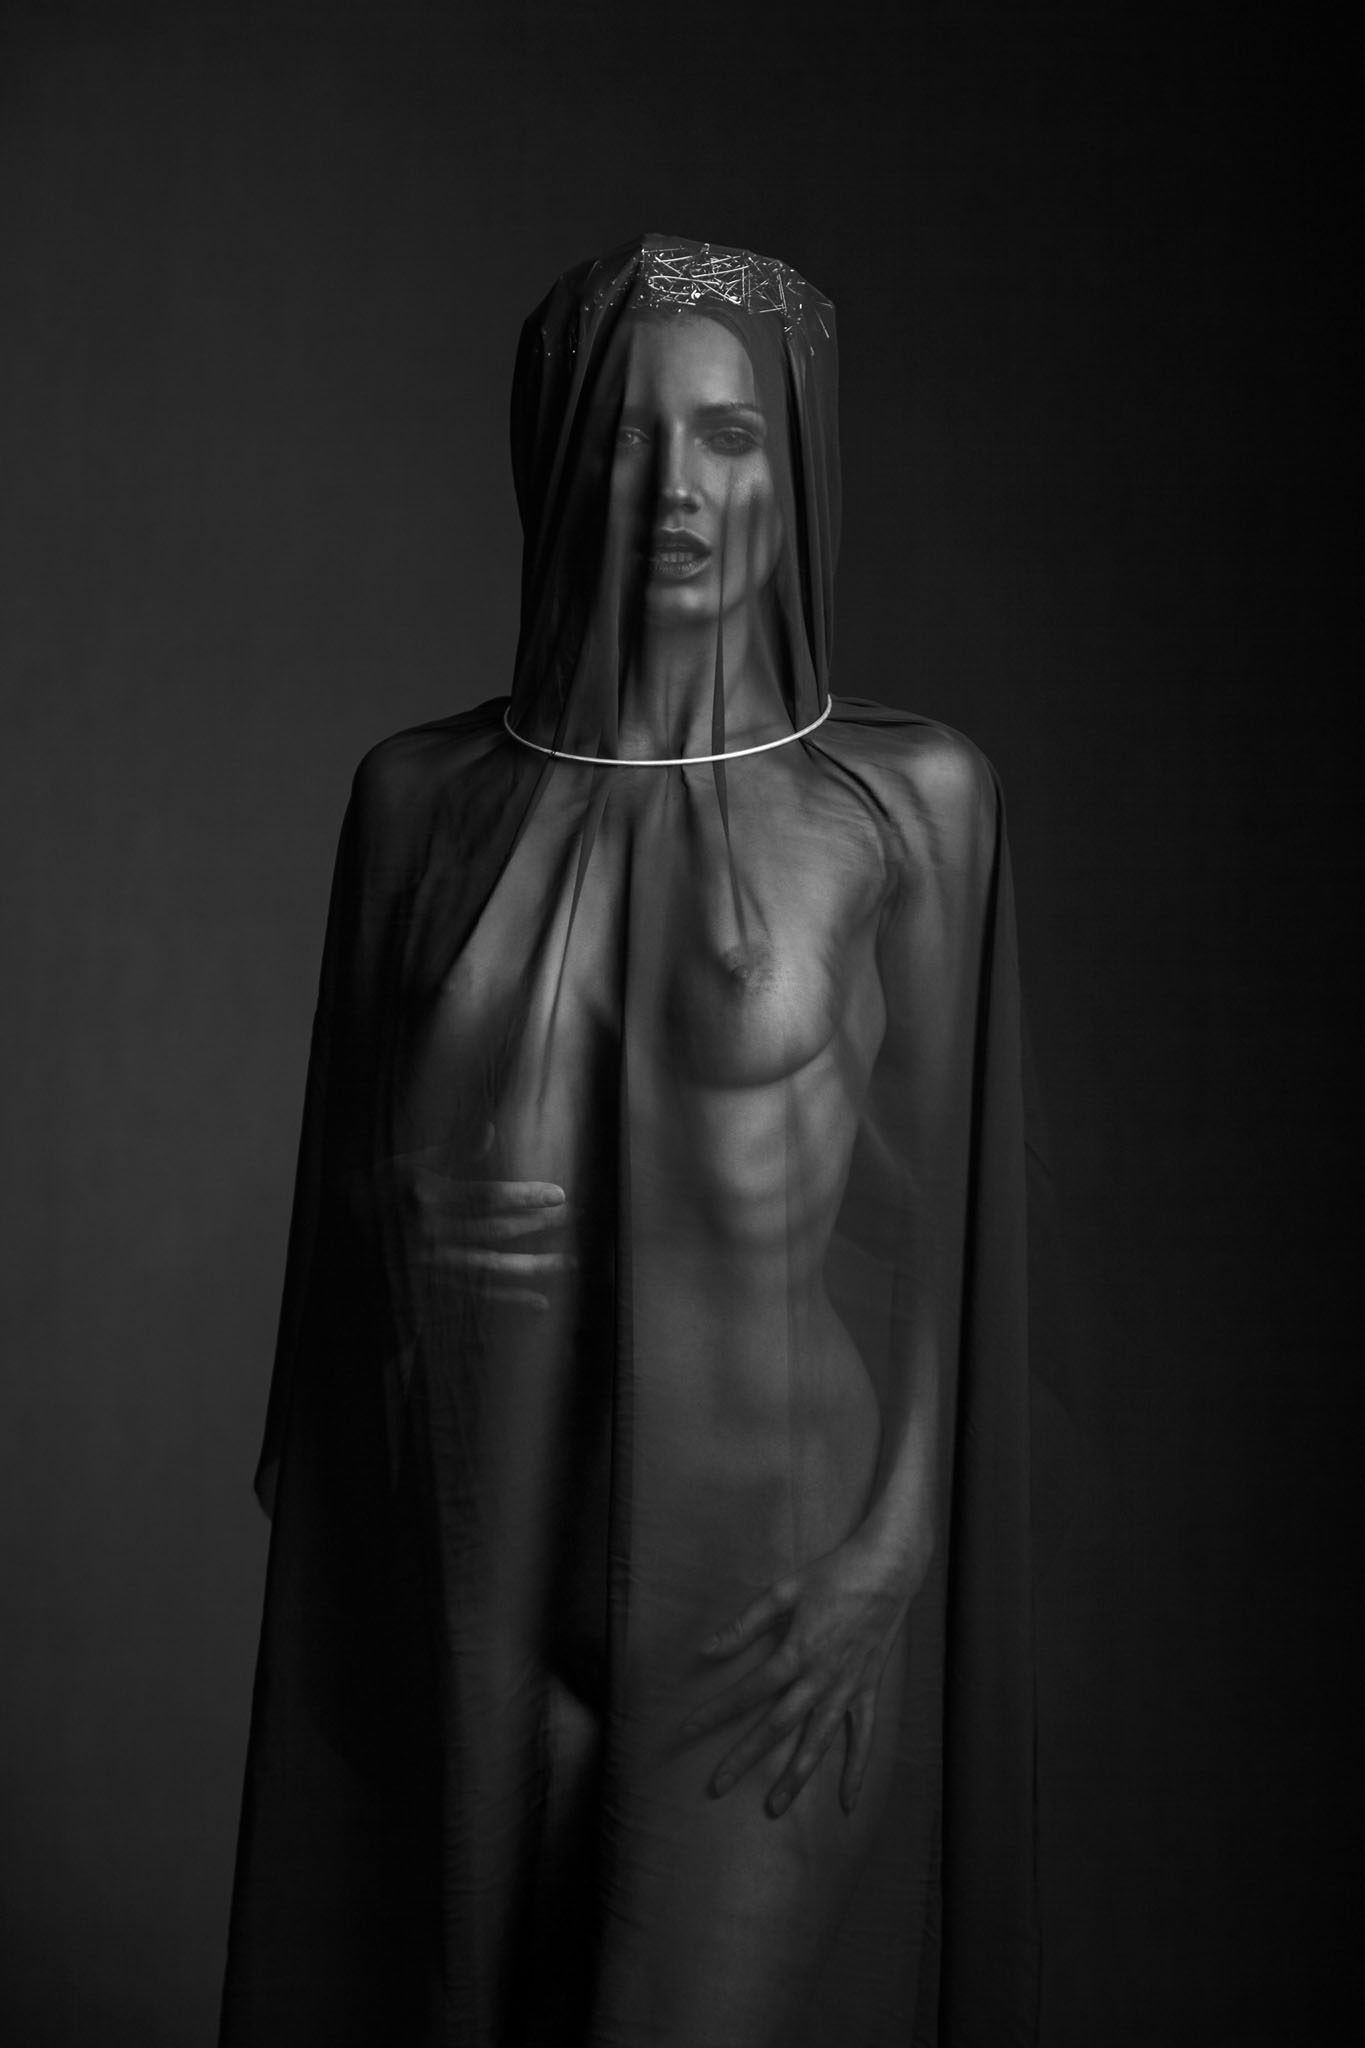 Nude fashion portrait of girl in a black shroud safety pin crown and metal collar fashion photographer Melbourne